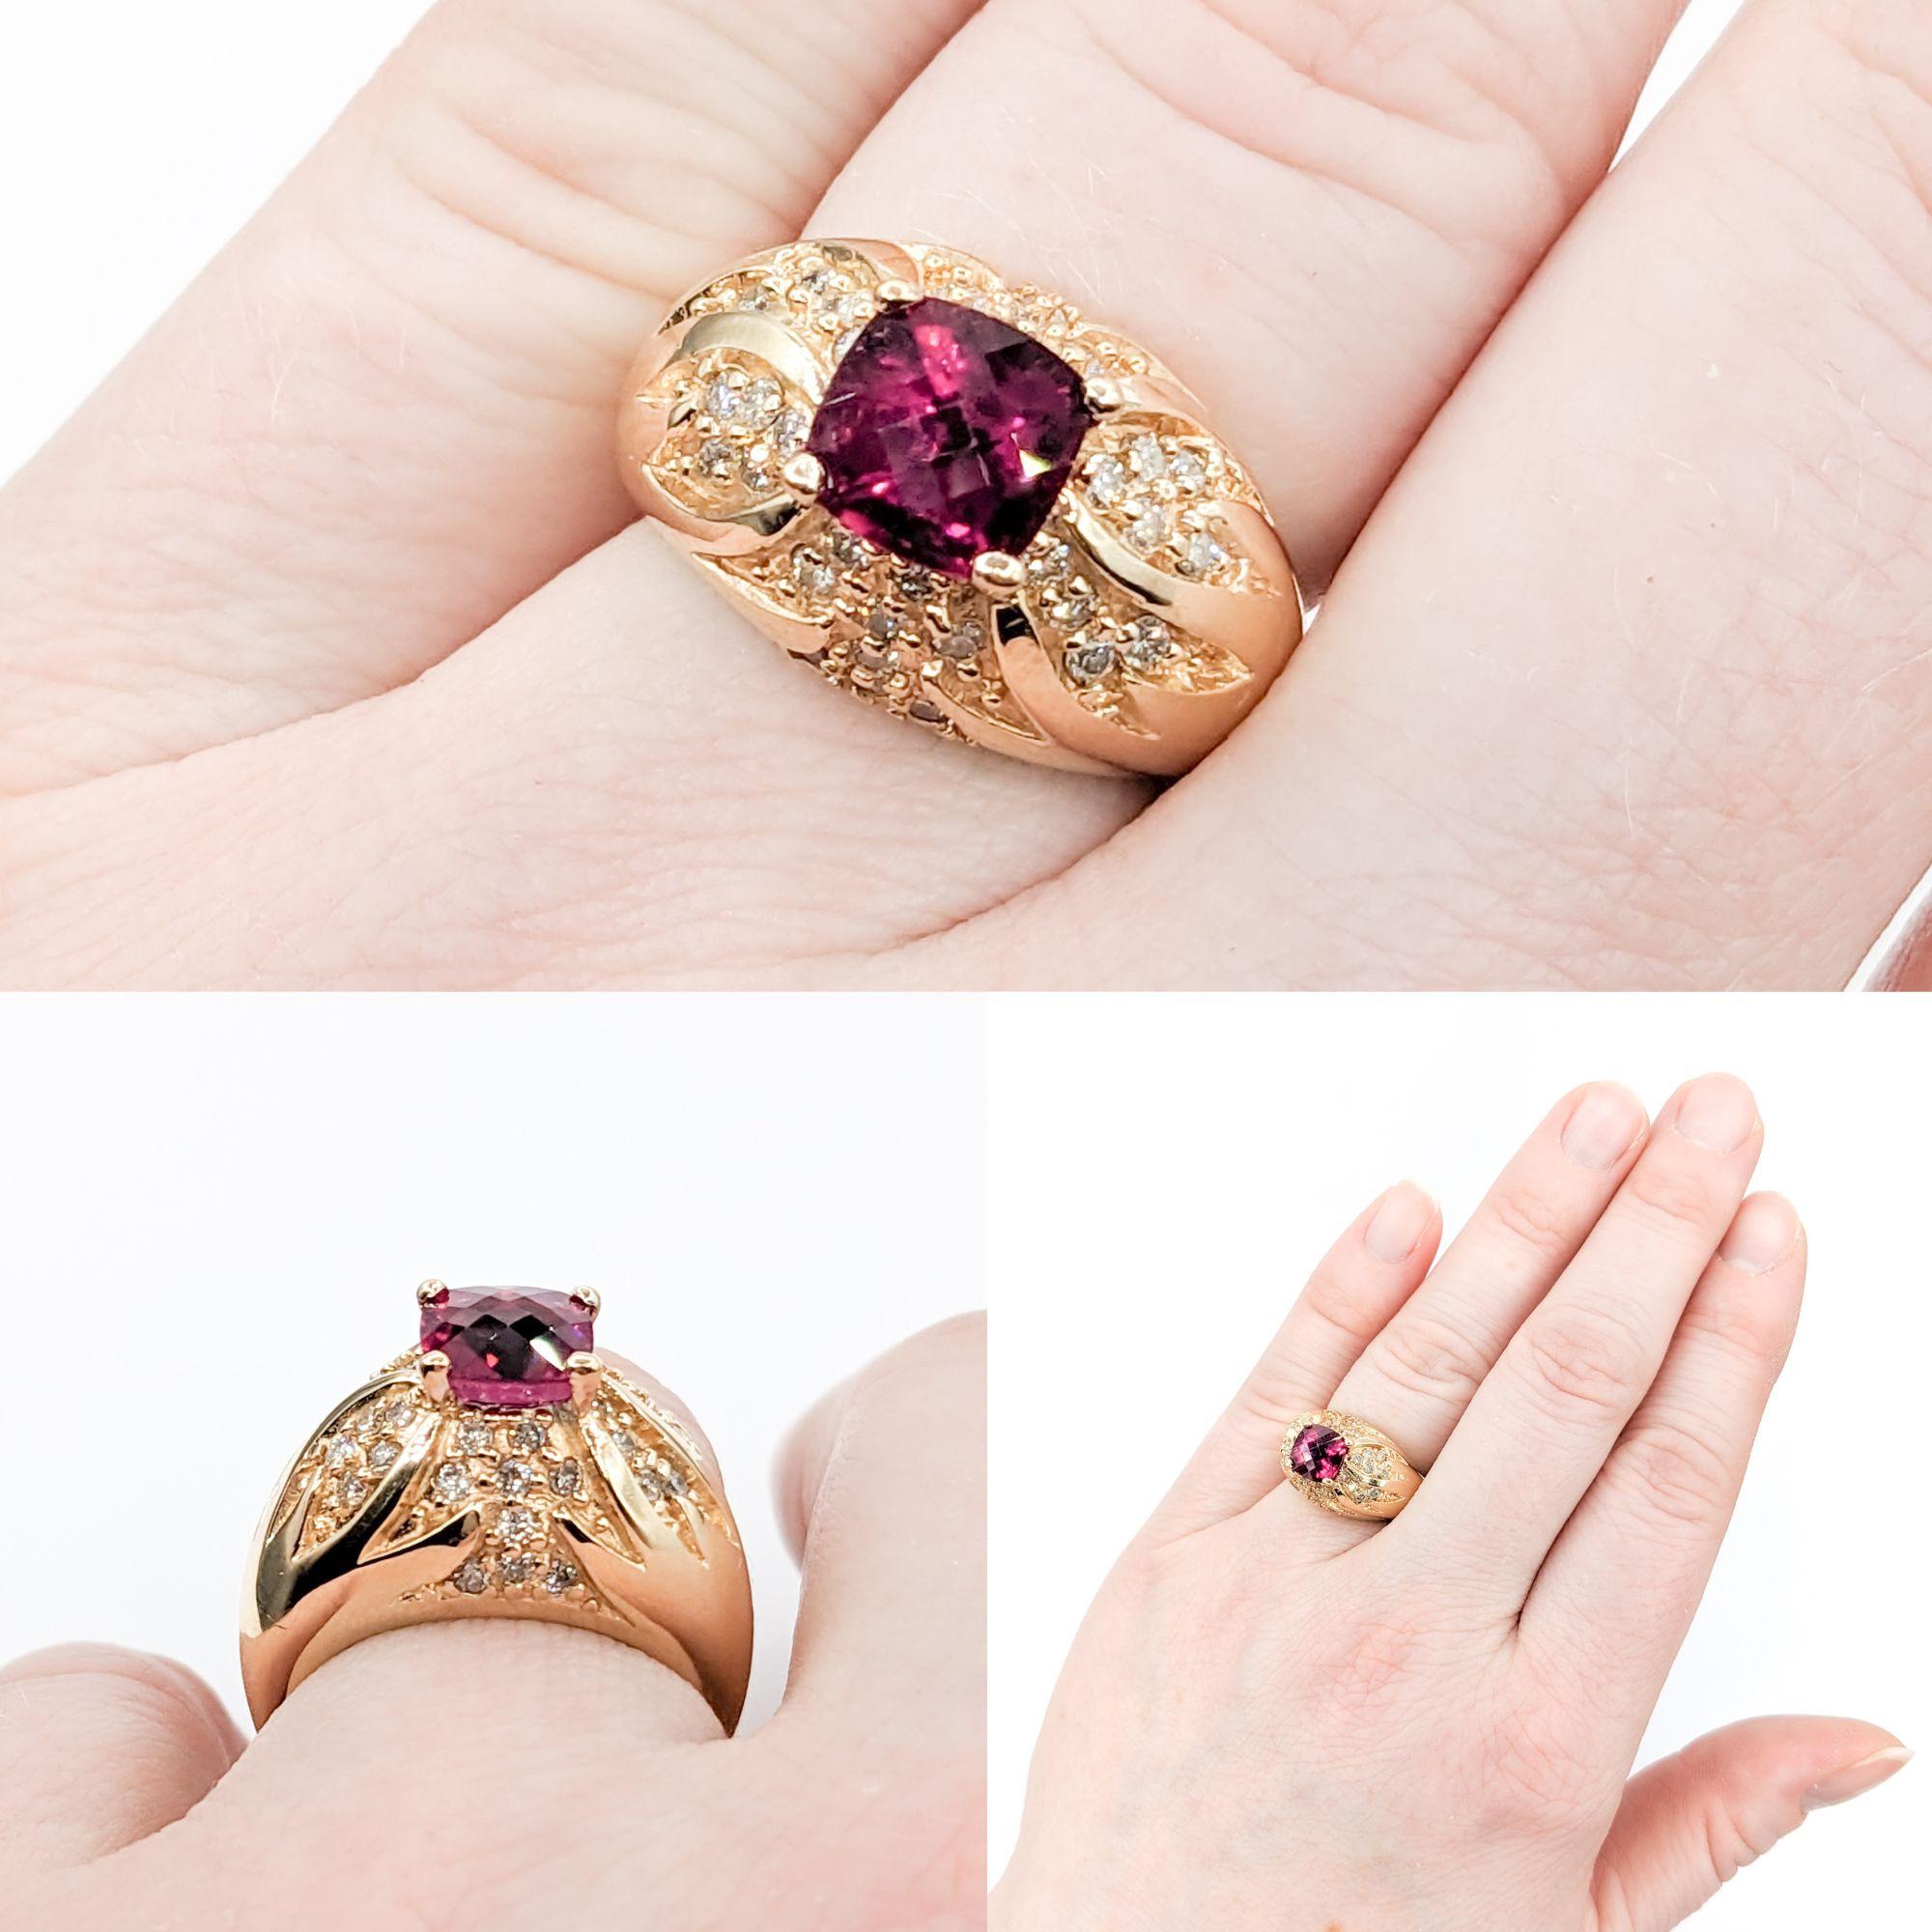 1.75ct Rubelite Tourmaline & .36ctw Diamond Ring In Tellow Gold

This exquisite Gemstone Fashion Ring, crafted in luxurious 14kt yellow gold, showcases a captivating 1.75ct Rubelite Tourmaline centerpiece. Accentuated with .36ctw round diamonds of I